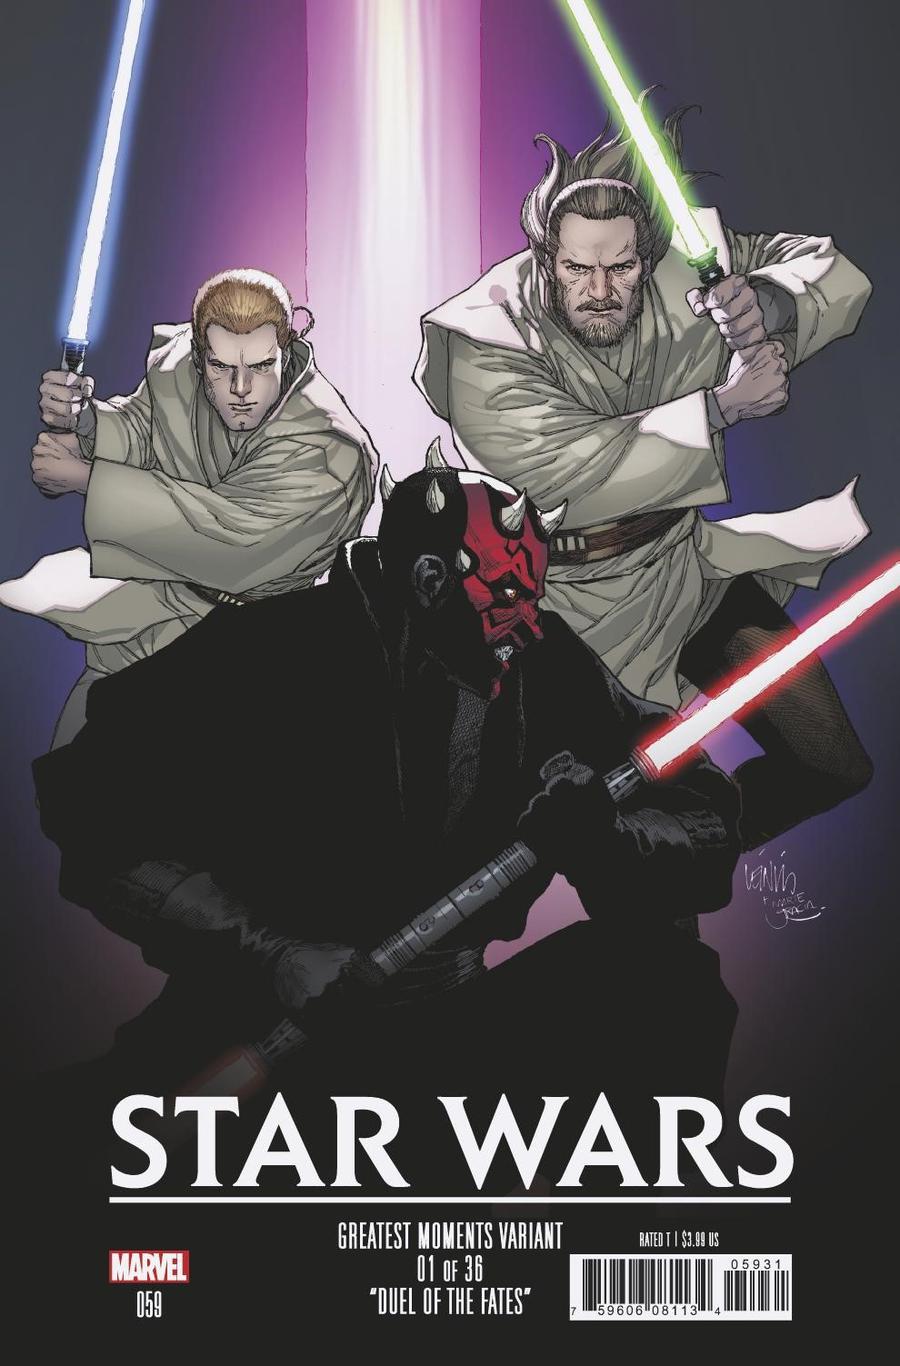 Star Wars Vol 4 #59 Cover C Variant Leinil Francis Yu Star Wars Greatest Moments Cover